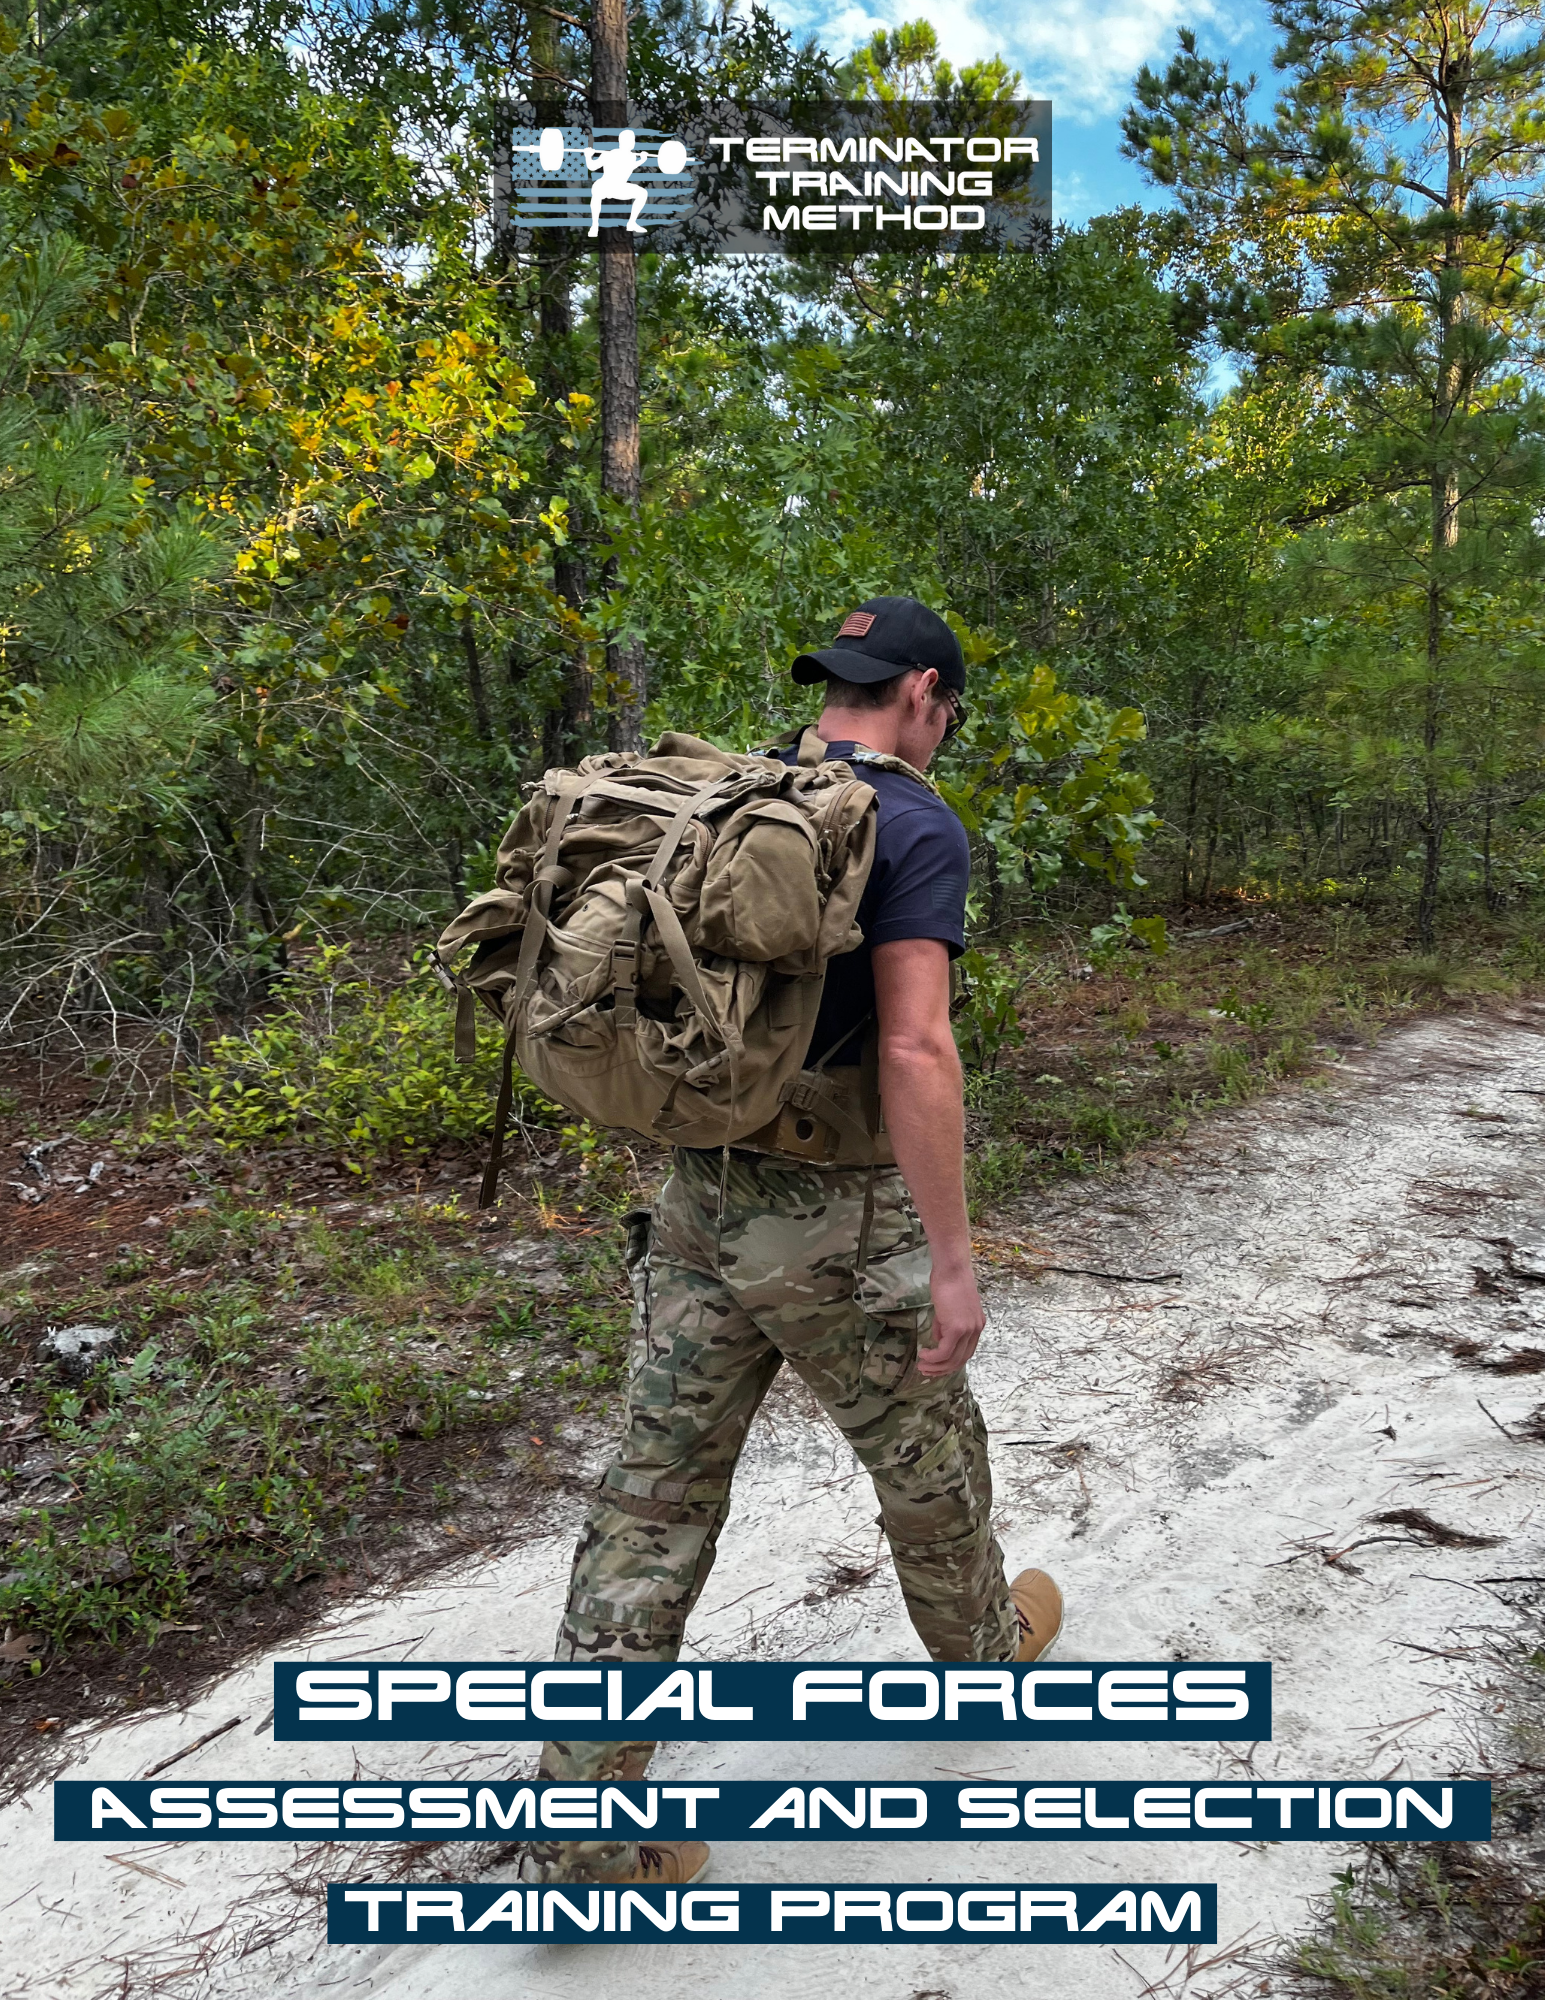 Special Forces Assessment and Selection (SFAS) Training Program